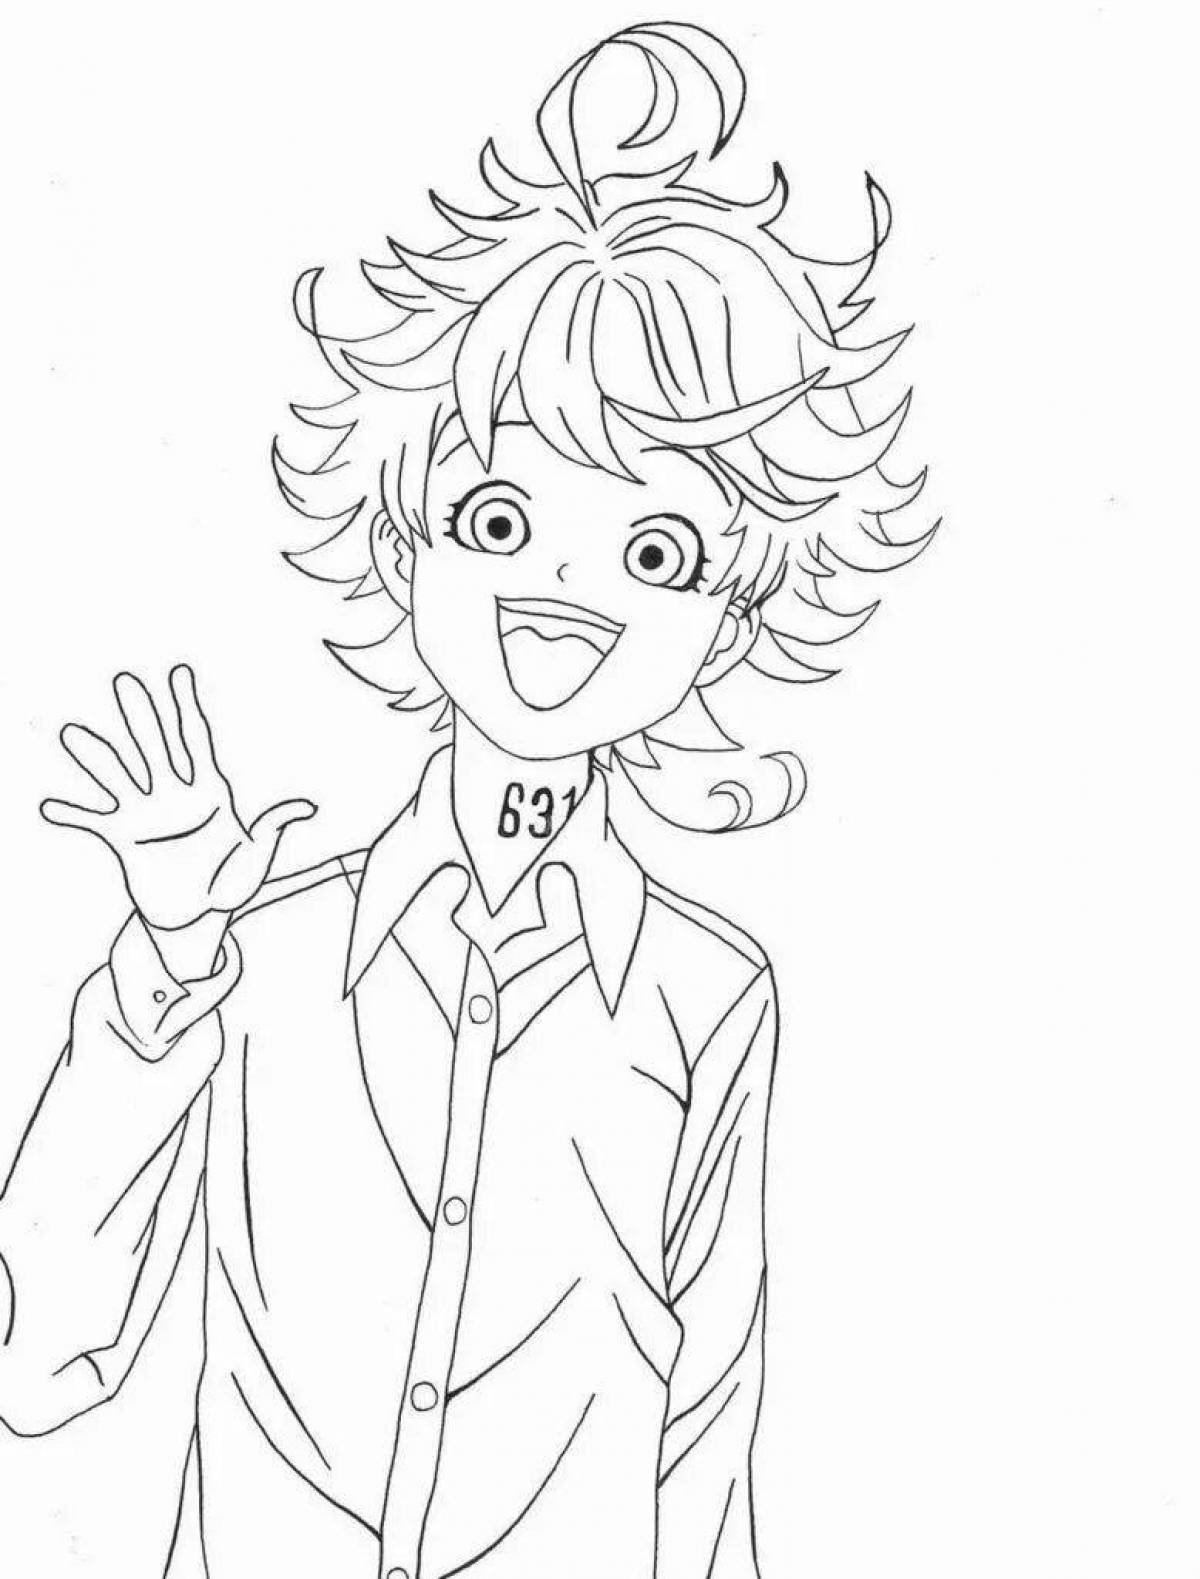 Sweet the promised neverland anime coloring page